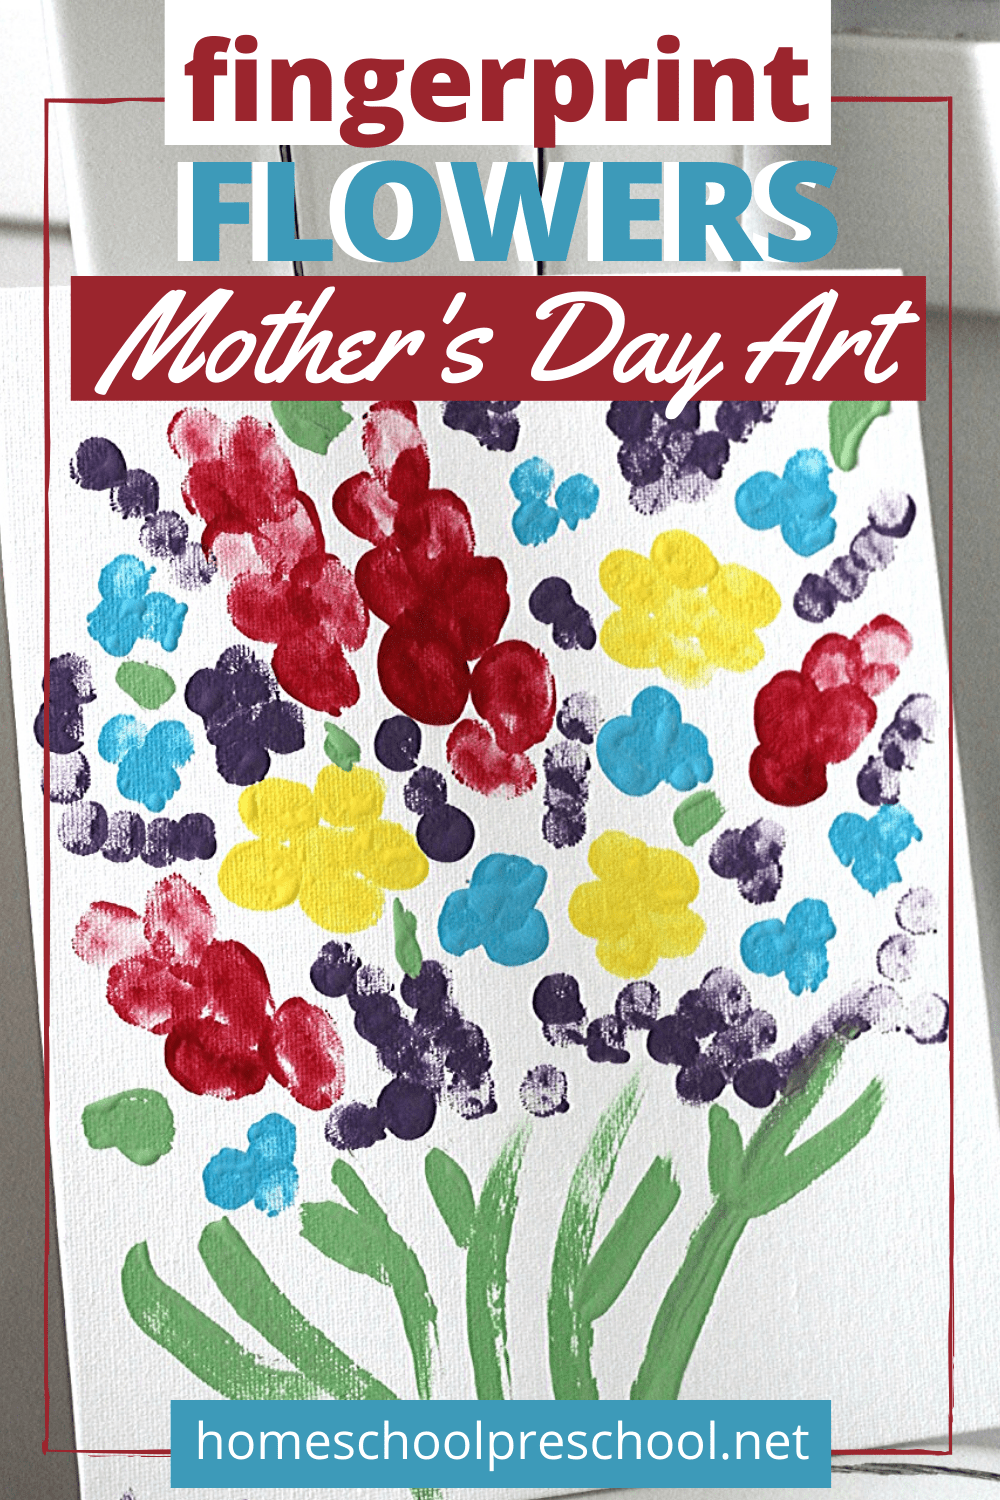 Fingerprint flower art is perfect for spring and summer. This adorable canvas is the perfect Mother's Day craft for preschoolers to make!